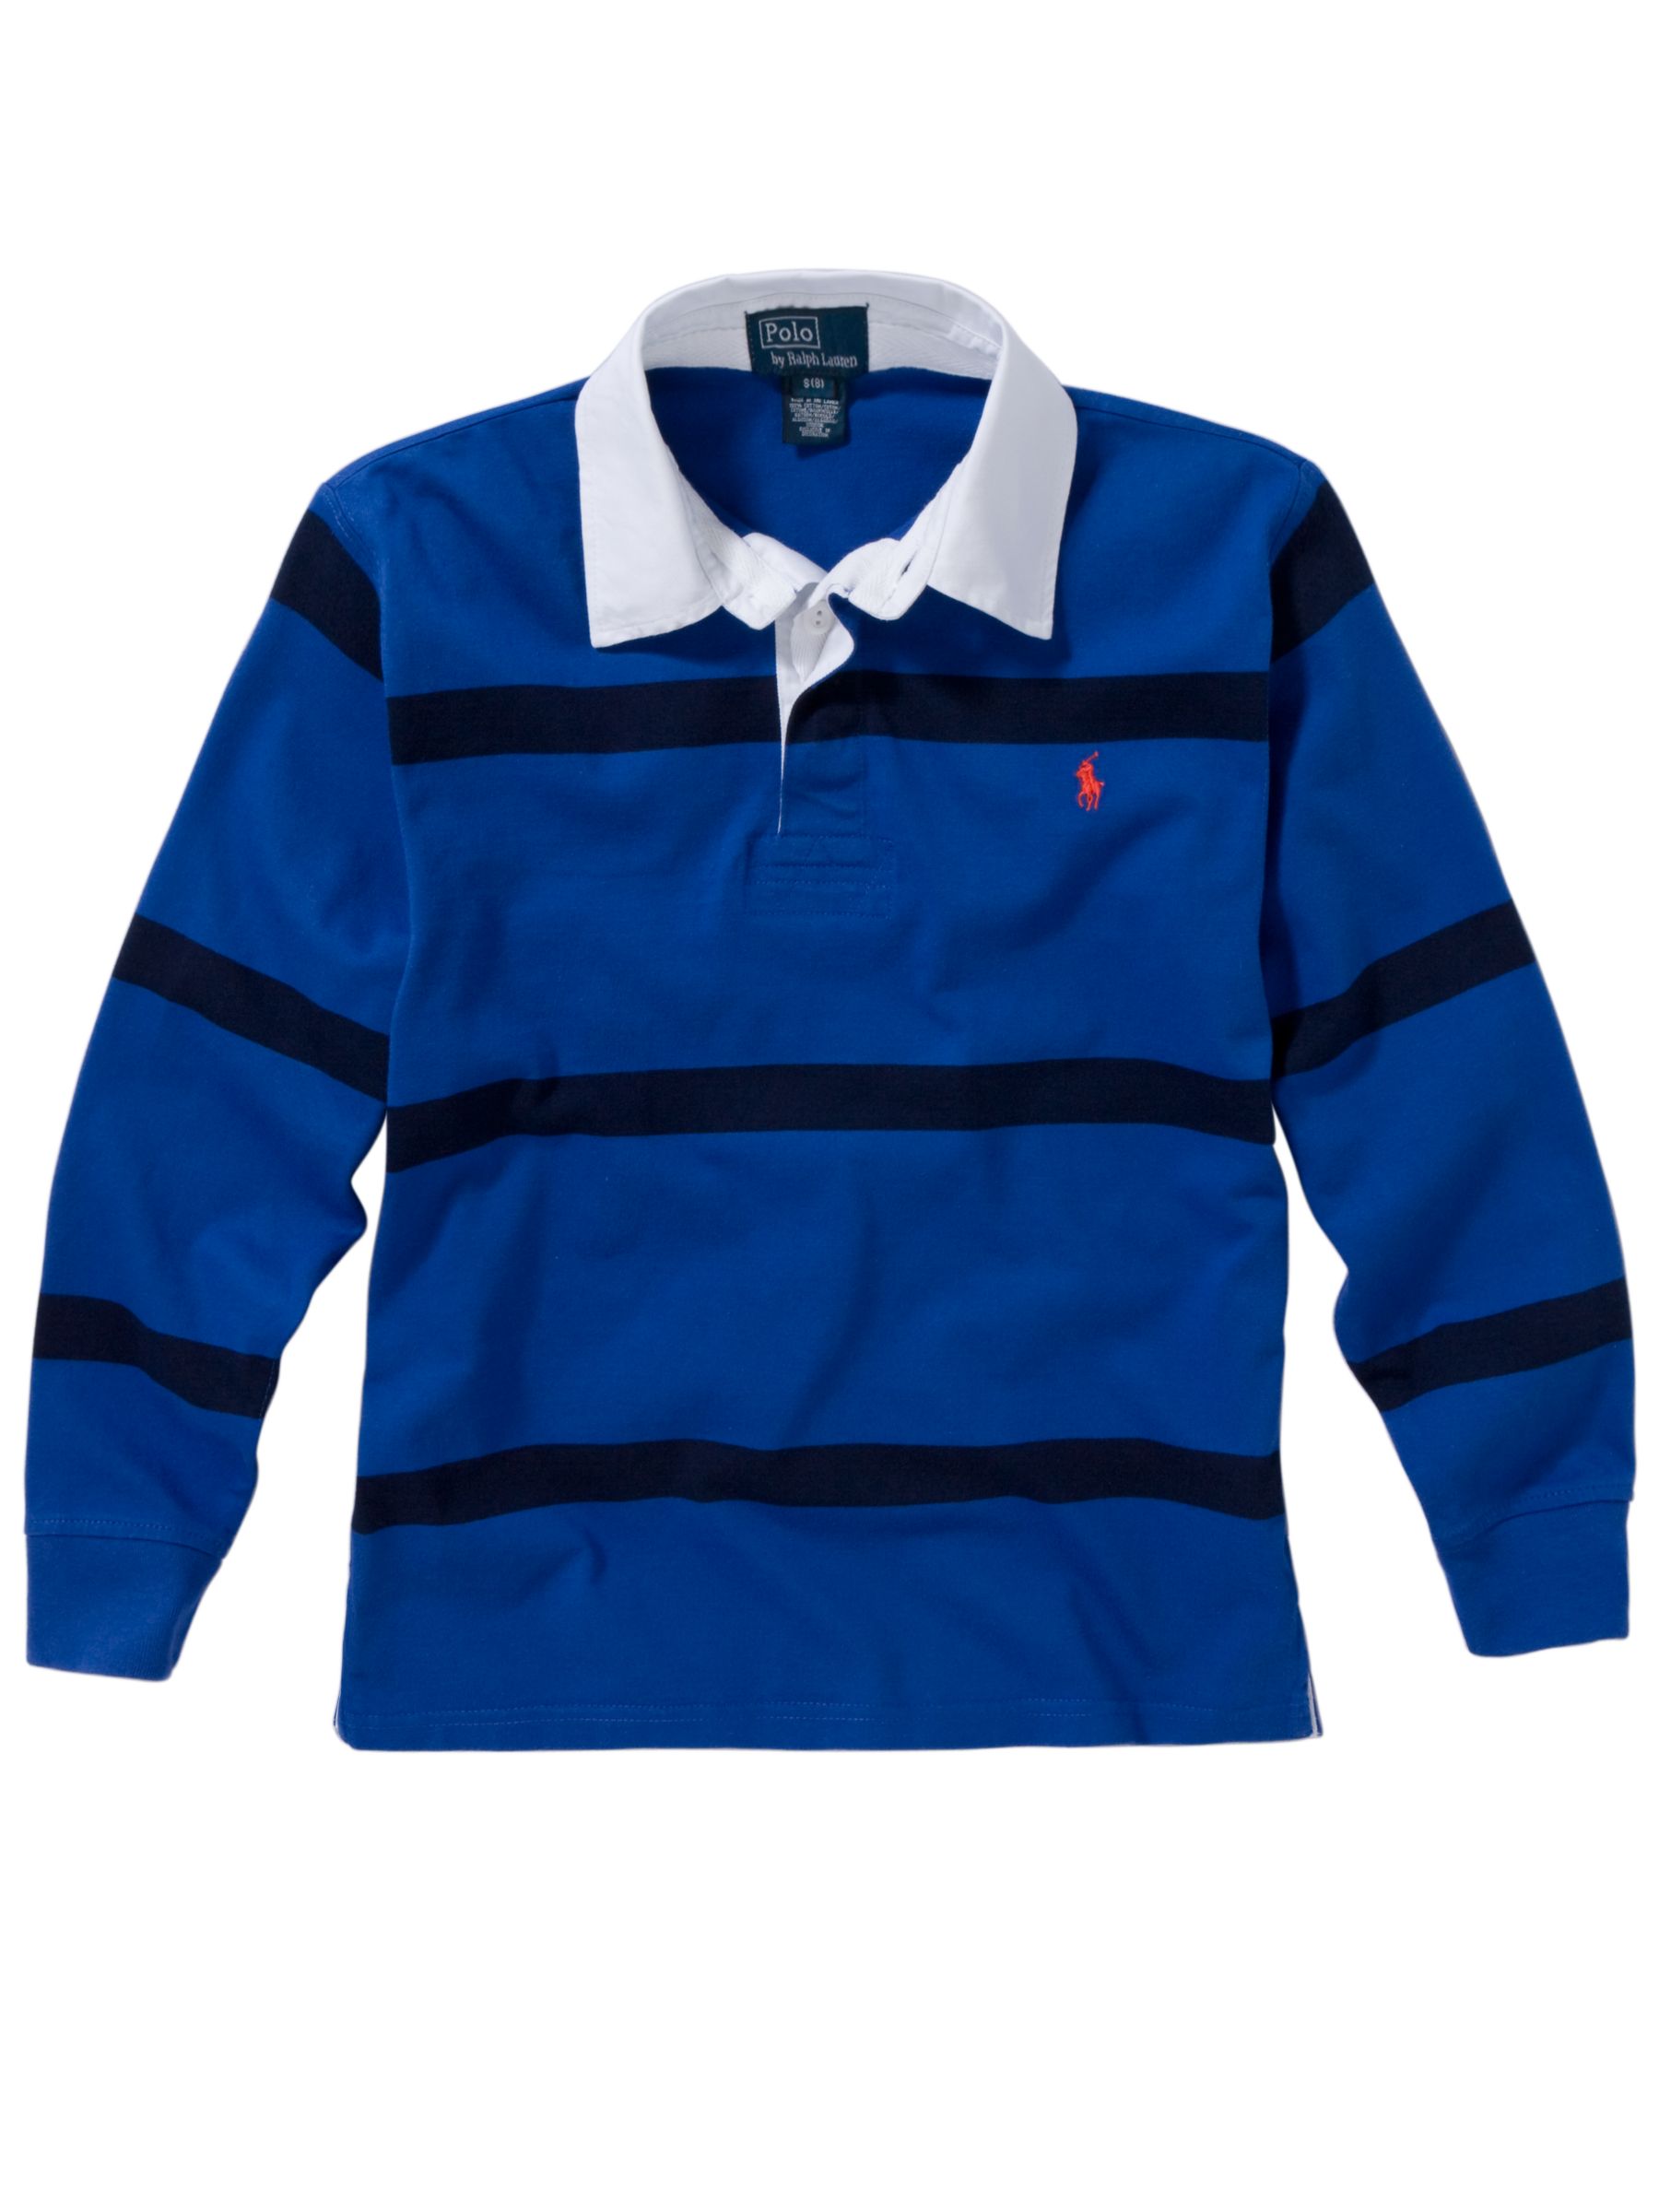 Rugby Shirt, Blue, 8 years